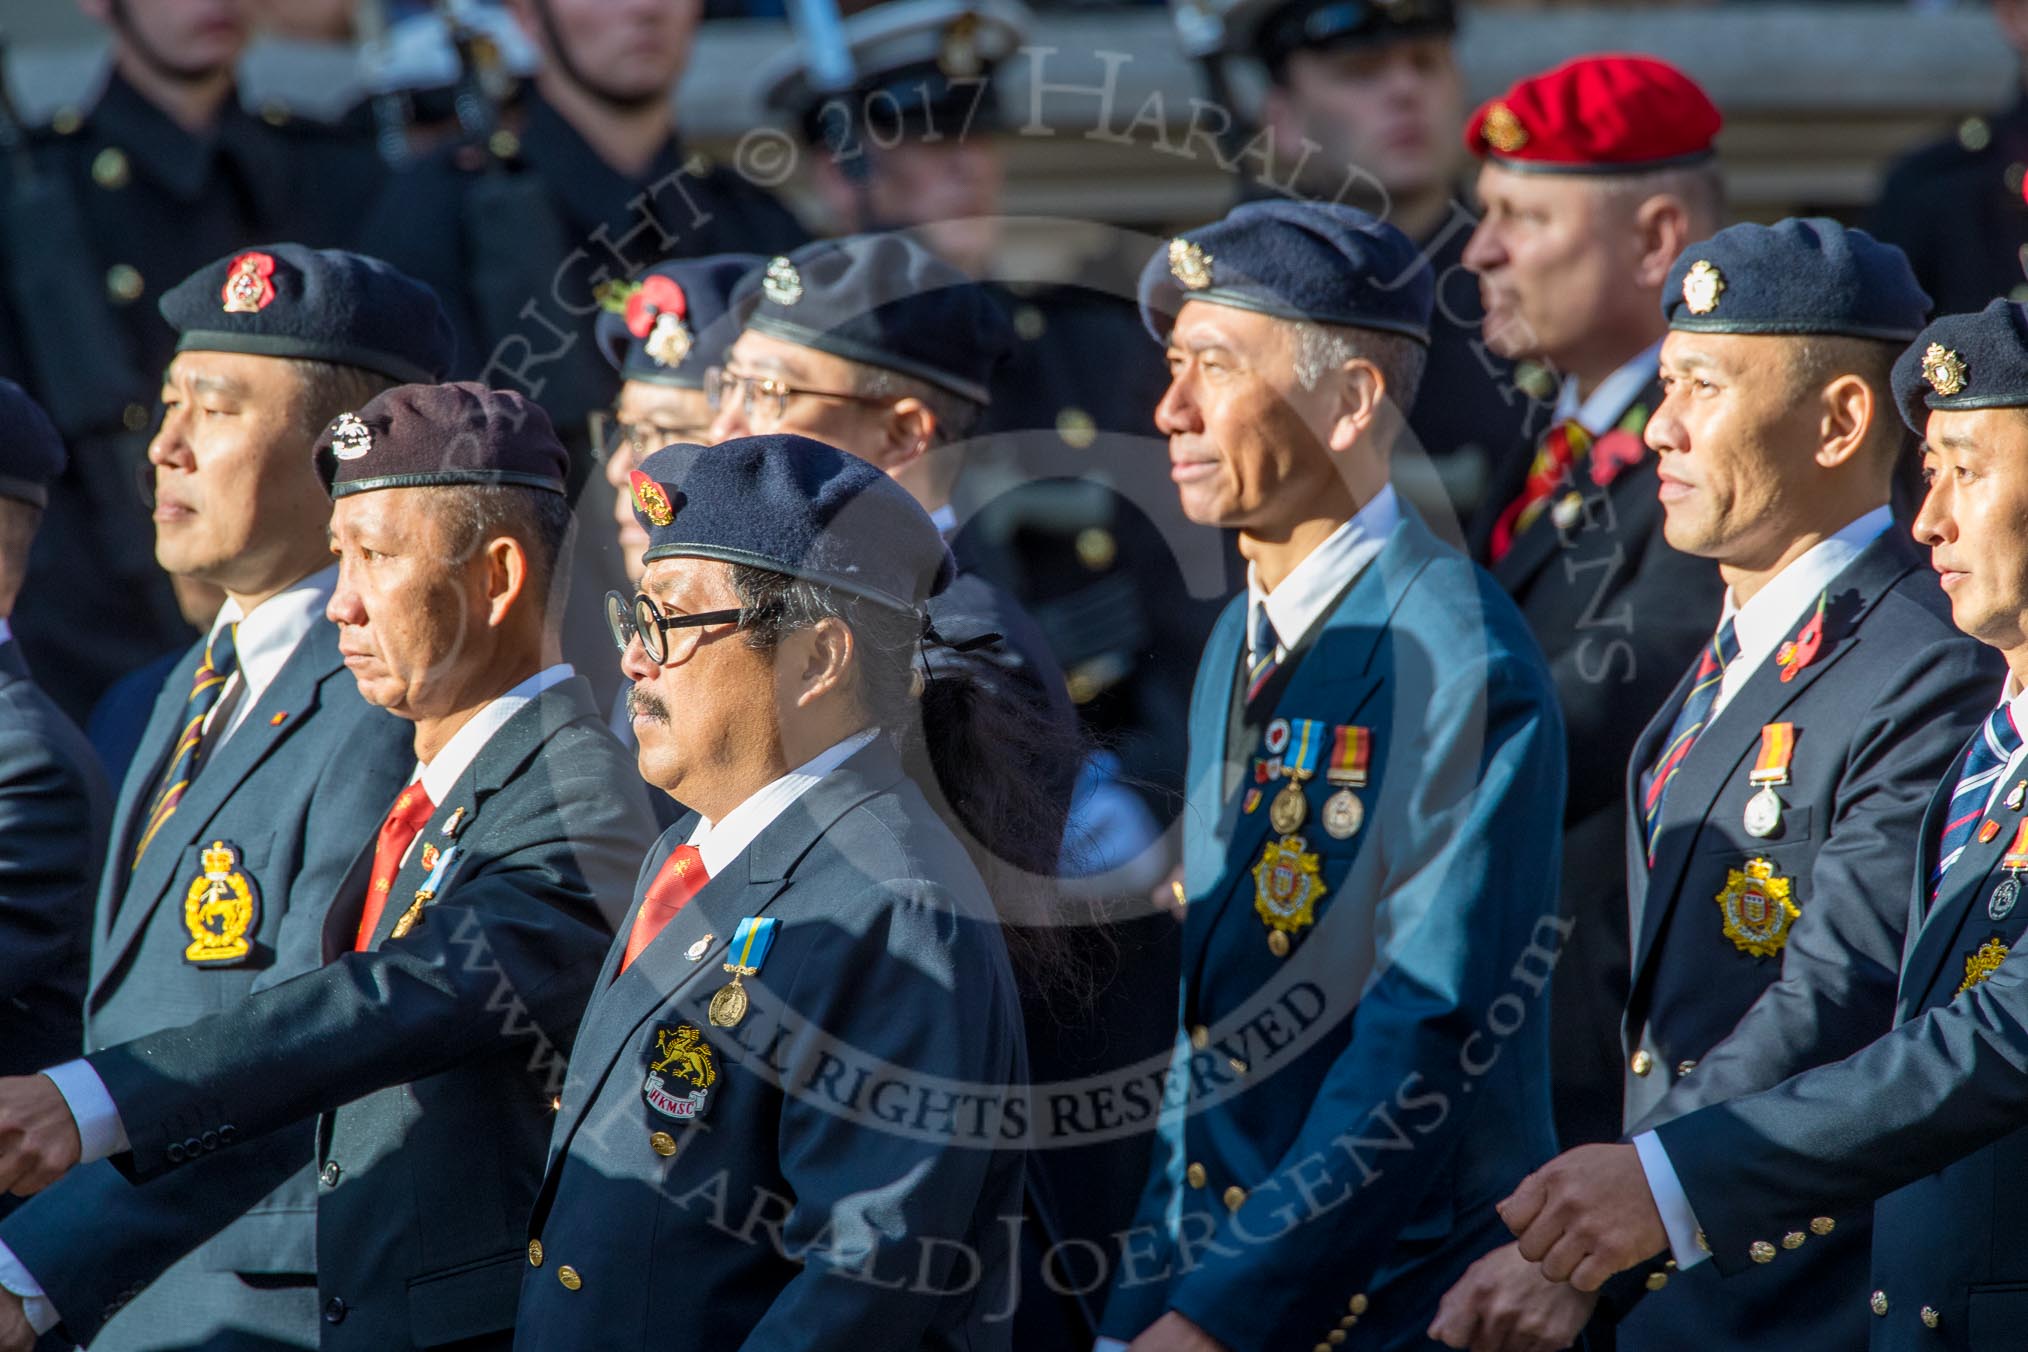 Hong Kong Military Service Corps - HKMSC (Group D21, 36 members) during the Royal British Legion March Past on Remembrance Sunday at the Cenotaph, Whitehall, Westminster, London, 11 November 2018, 12:24.